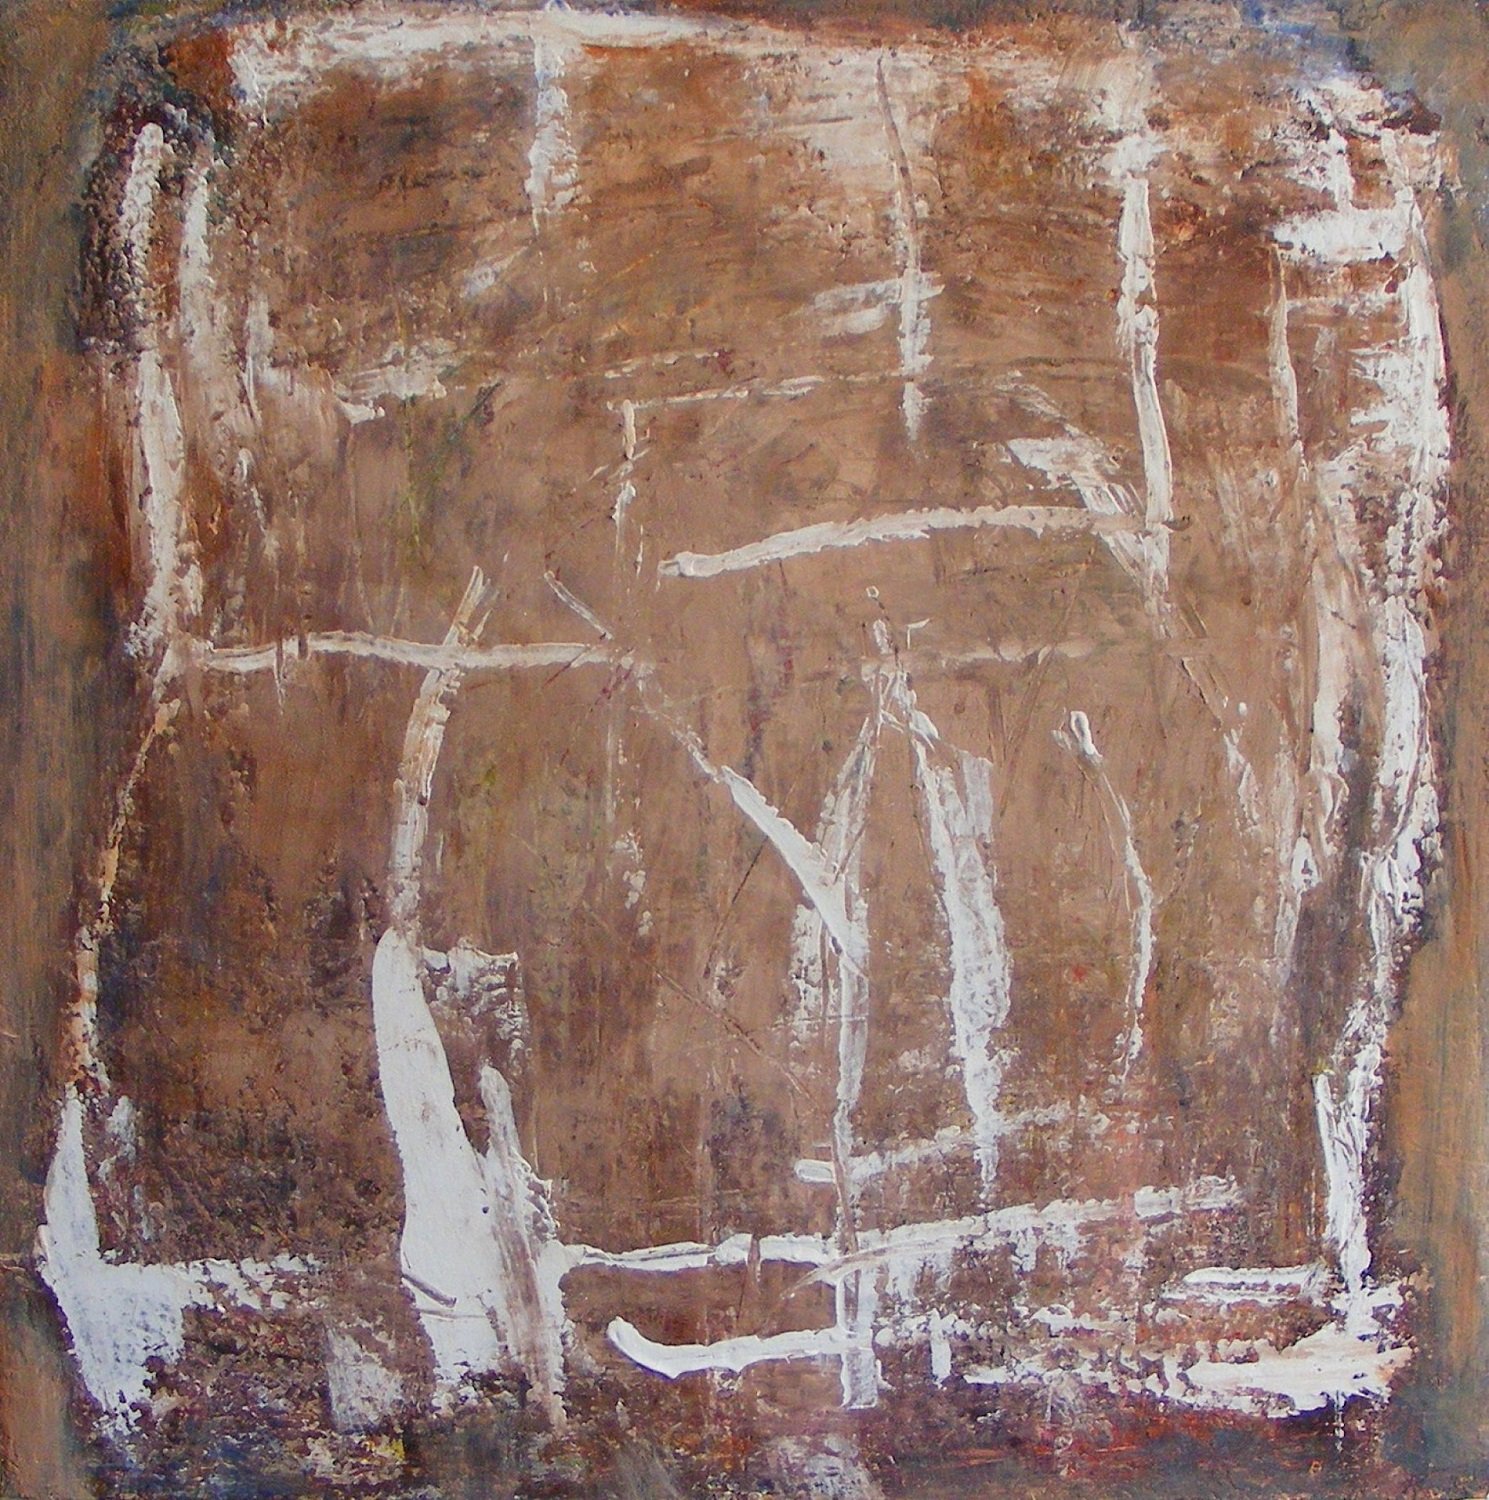  “Cryptic Message”  30 x 30”, acrylic paint, modelling paste, gel medium on canvas.  $750    Appears to be a message of ancient markings on a wall that cannot be deciphered.  